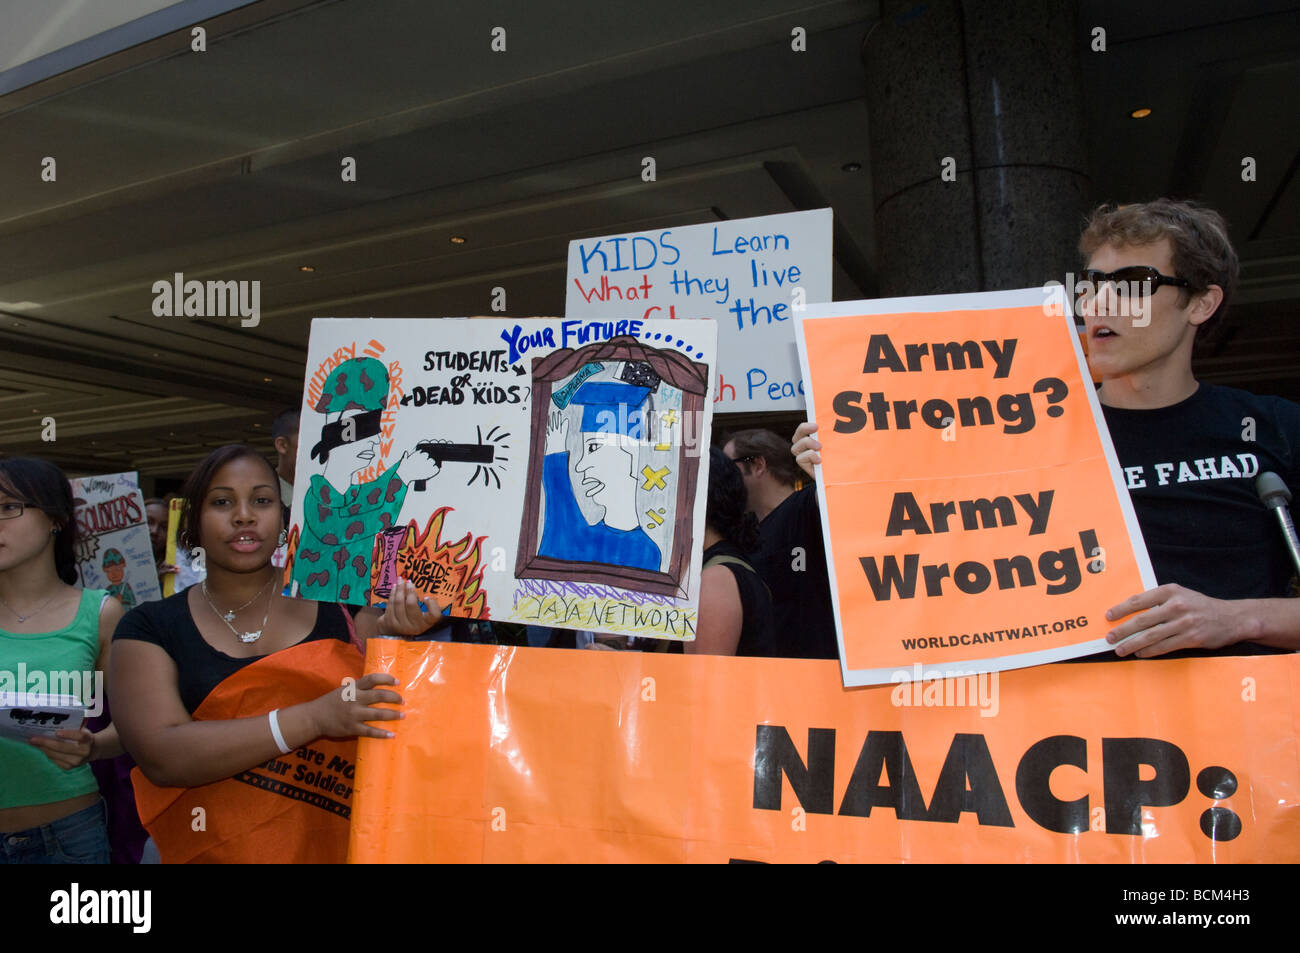 Demonstrators protest the inclusion of Army Strong recruiters outside the NAACP Diversity Job Fair in New York Stock Photo